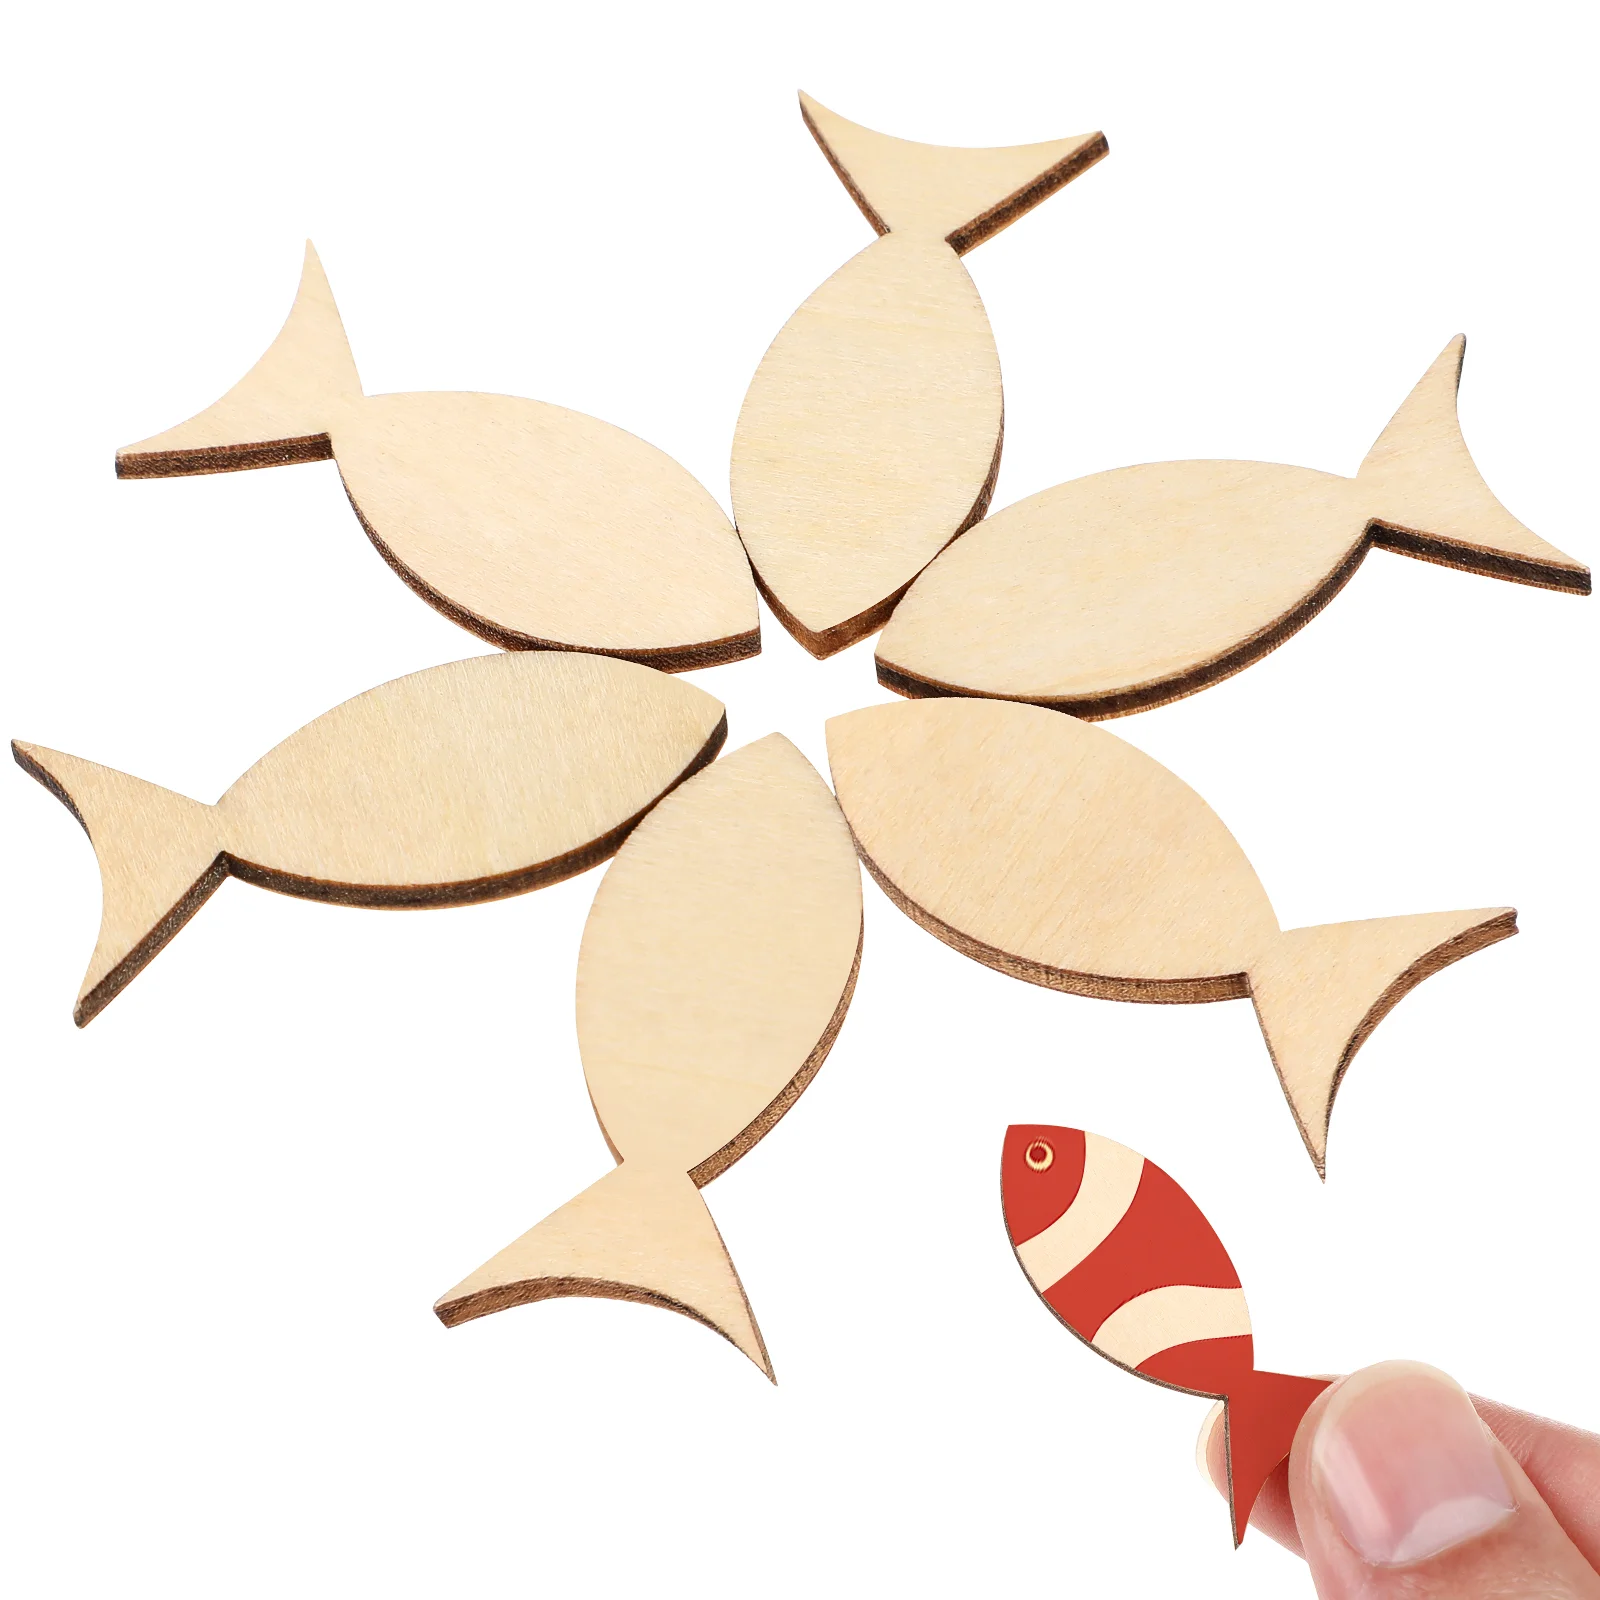 

100 Pcs Wooden Solid Fish Shapes Crafting Chip Ship Ornaments Tags Gift Decor Unfinished Slices Surfboard Embellishments